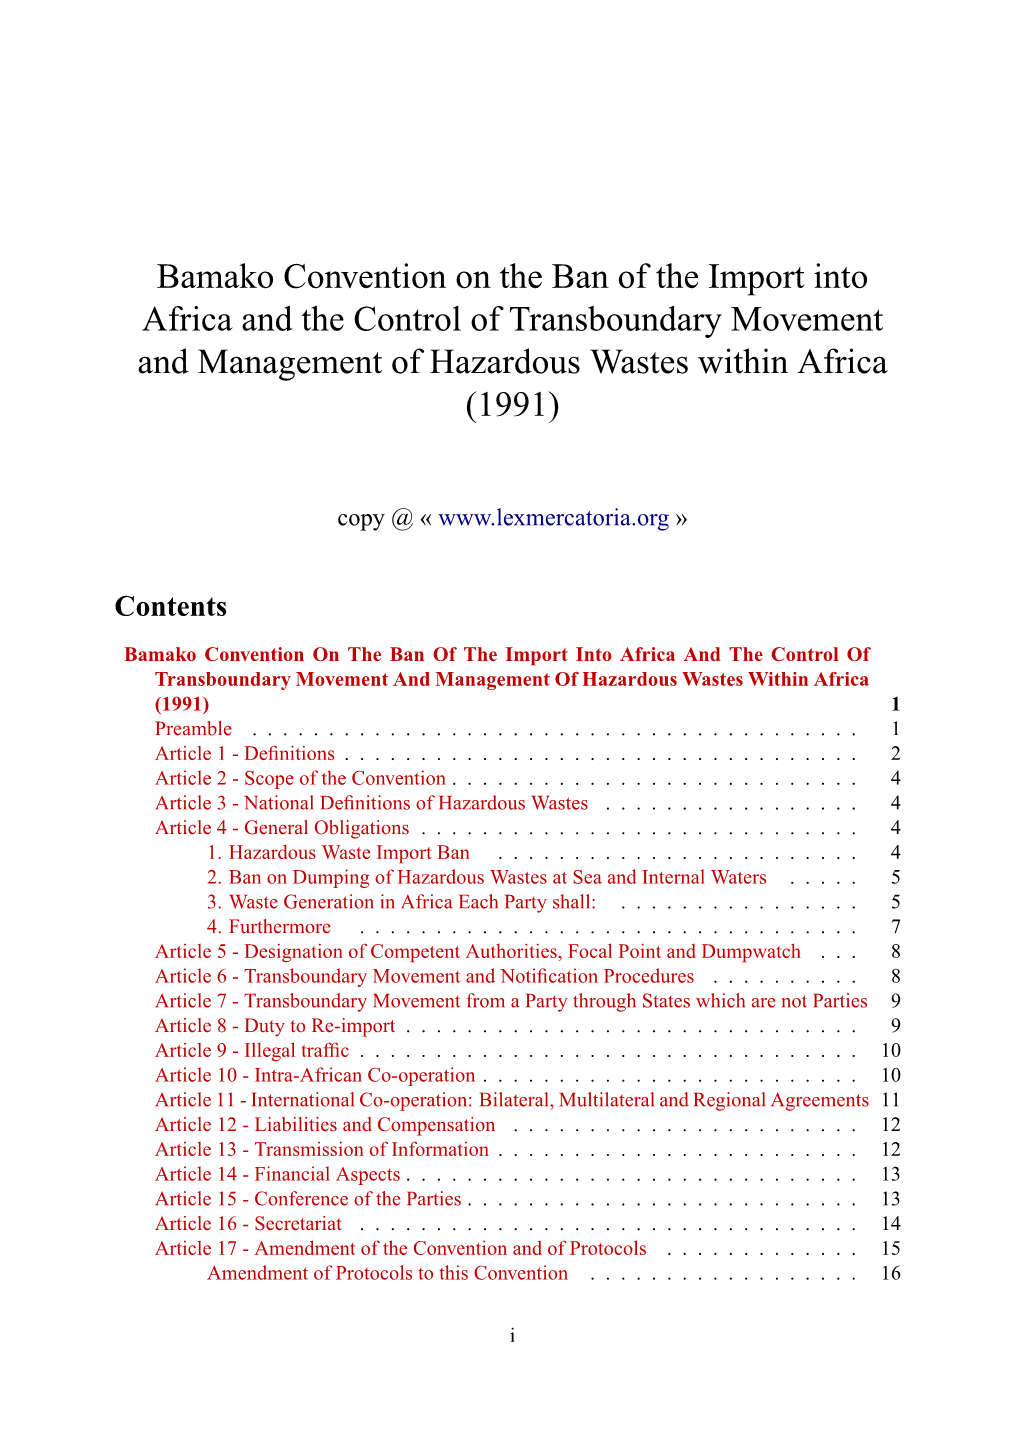 Bamako Convention on the Ban of the Import Into Africa and the Control of Transboundary Movement and Management of Hazardous Wastes Within Africa (1991)